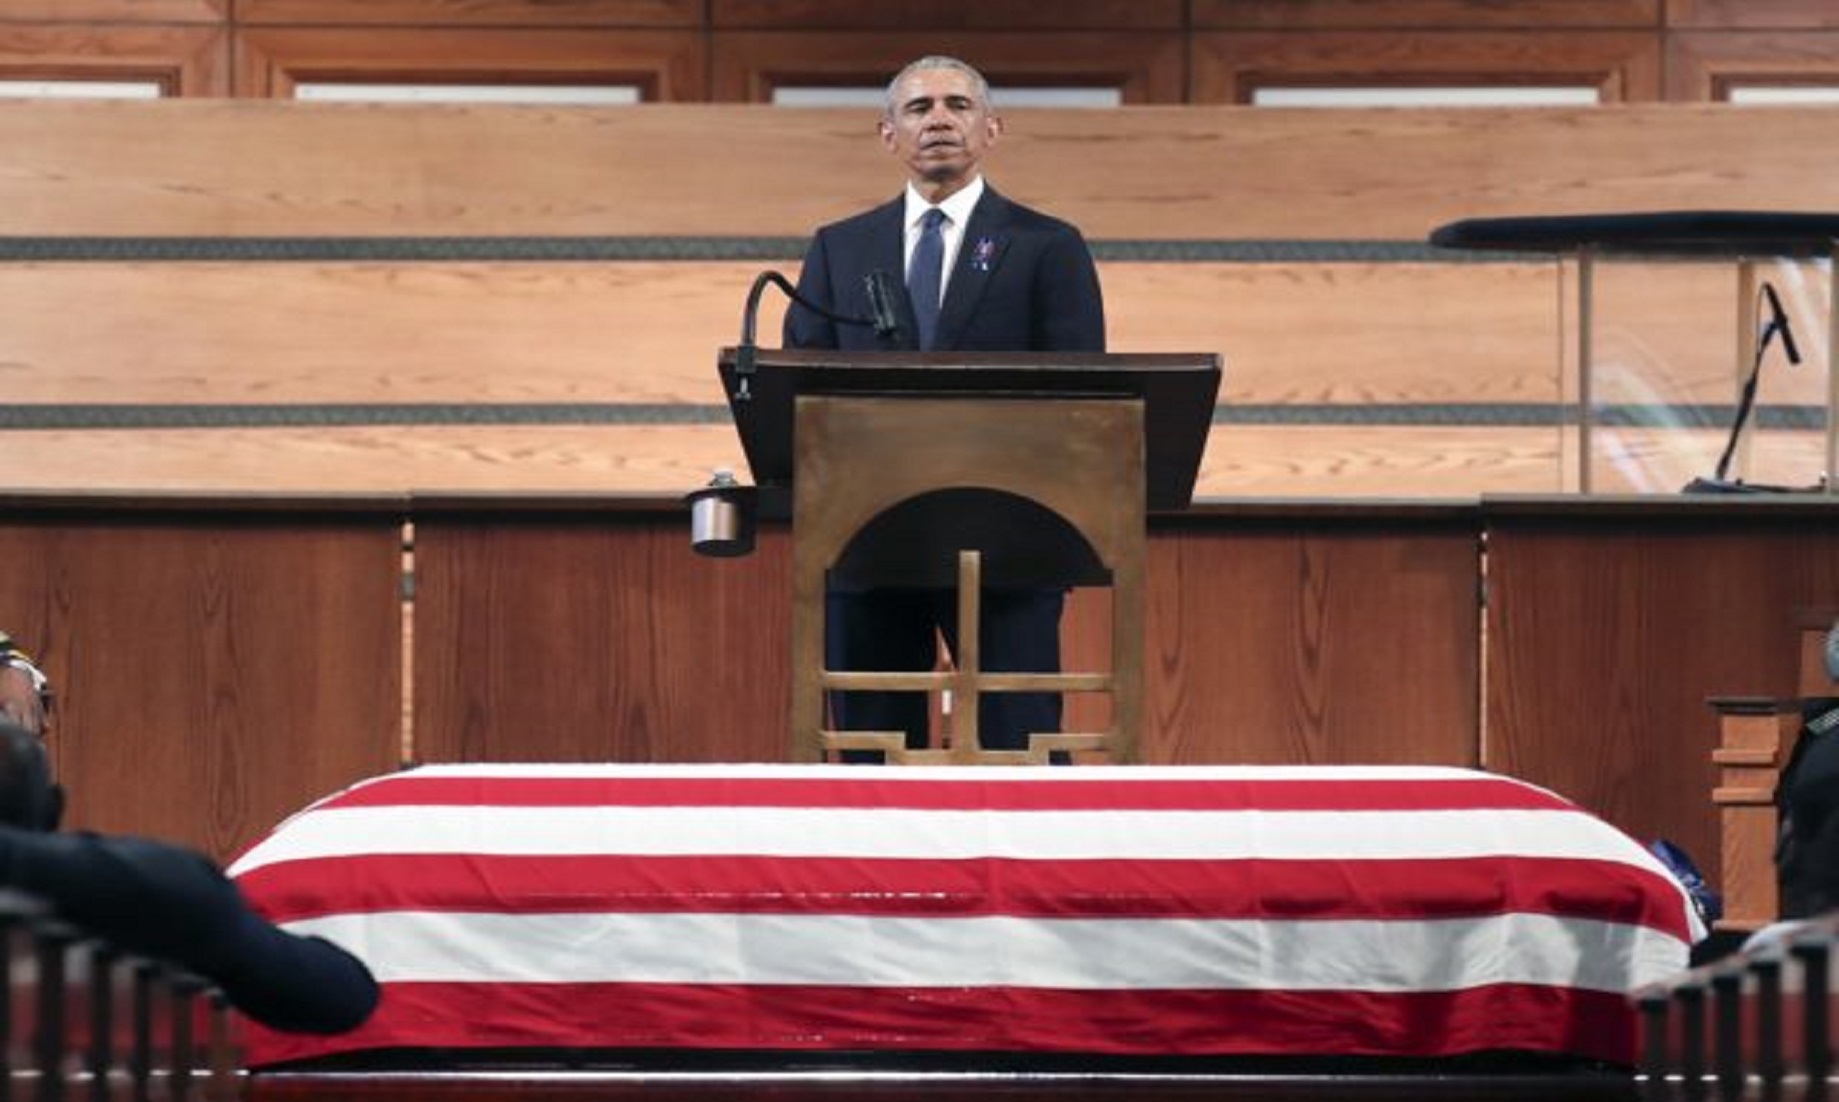 Obama Warns, Voting Rights Under Threat, At John Lewis’ Funeral